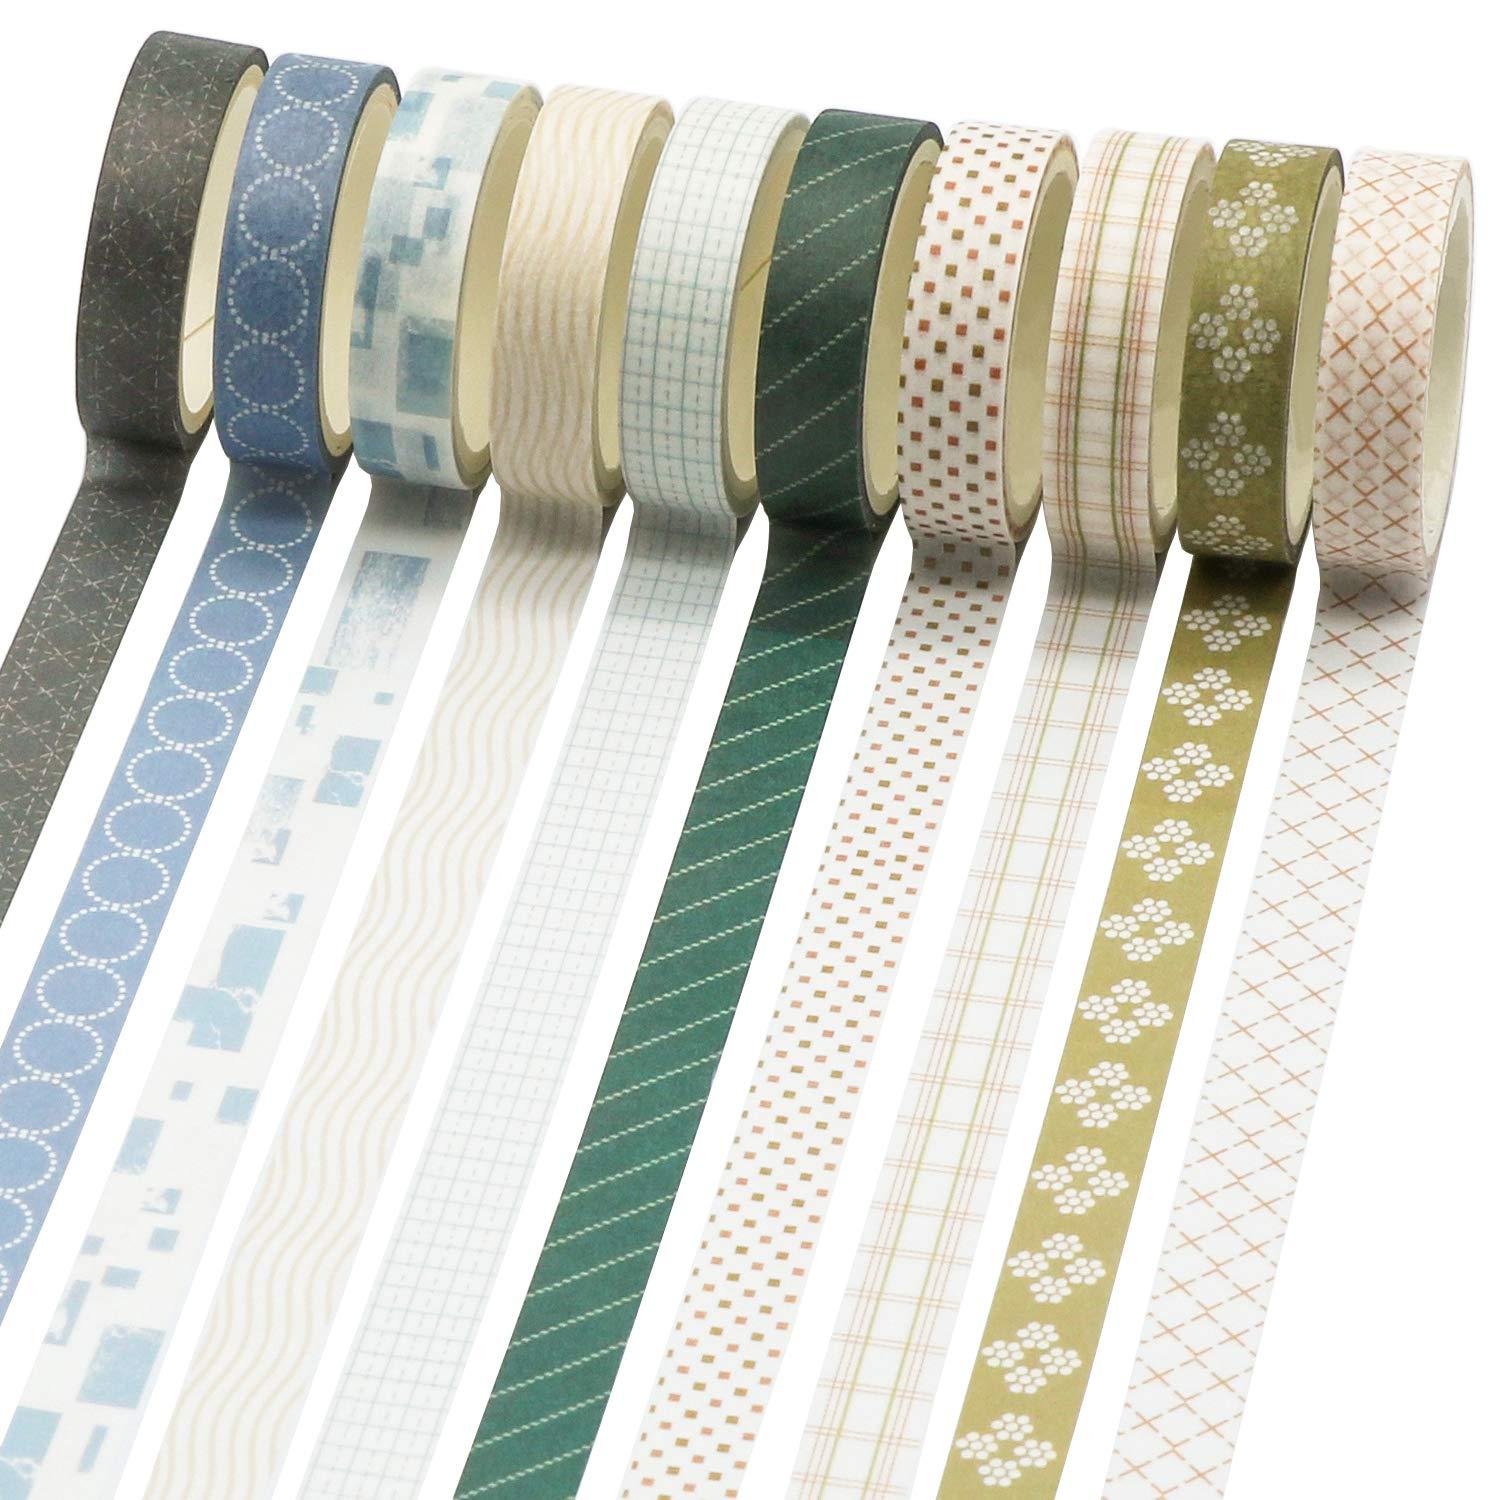 1 piece Gold Washi Tape Set 6 rolls, Decorative Craft Tapes Kit of Cute  Patterns for